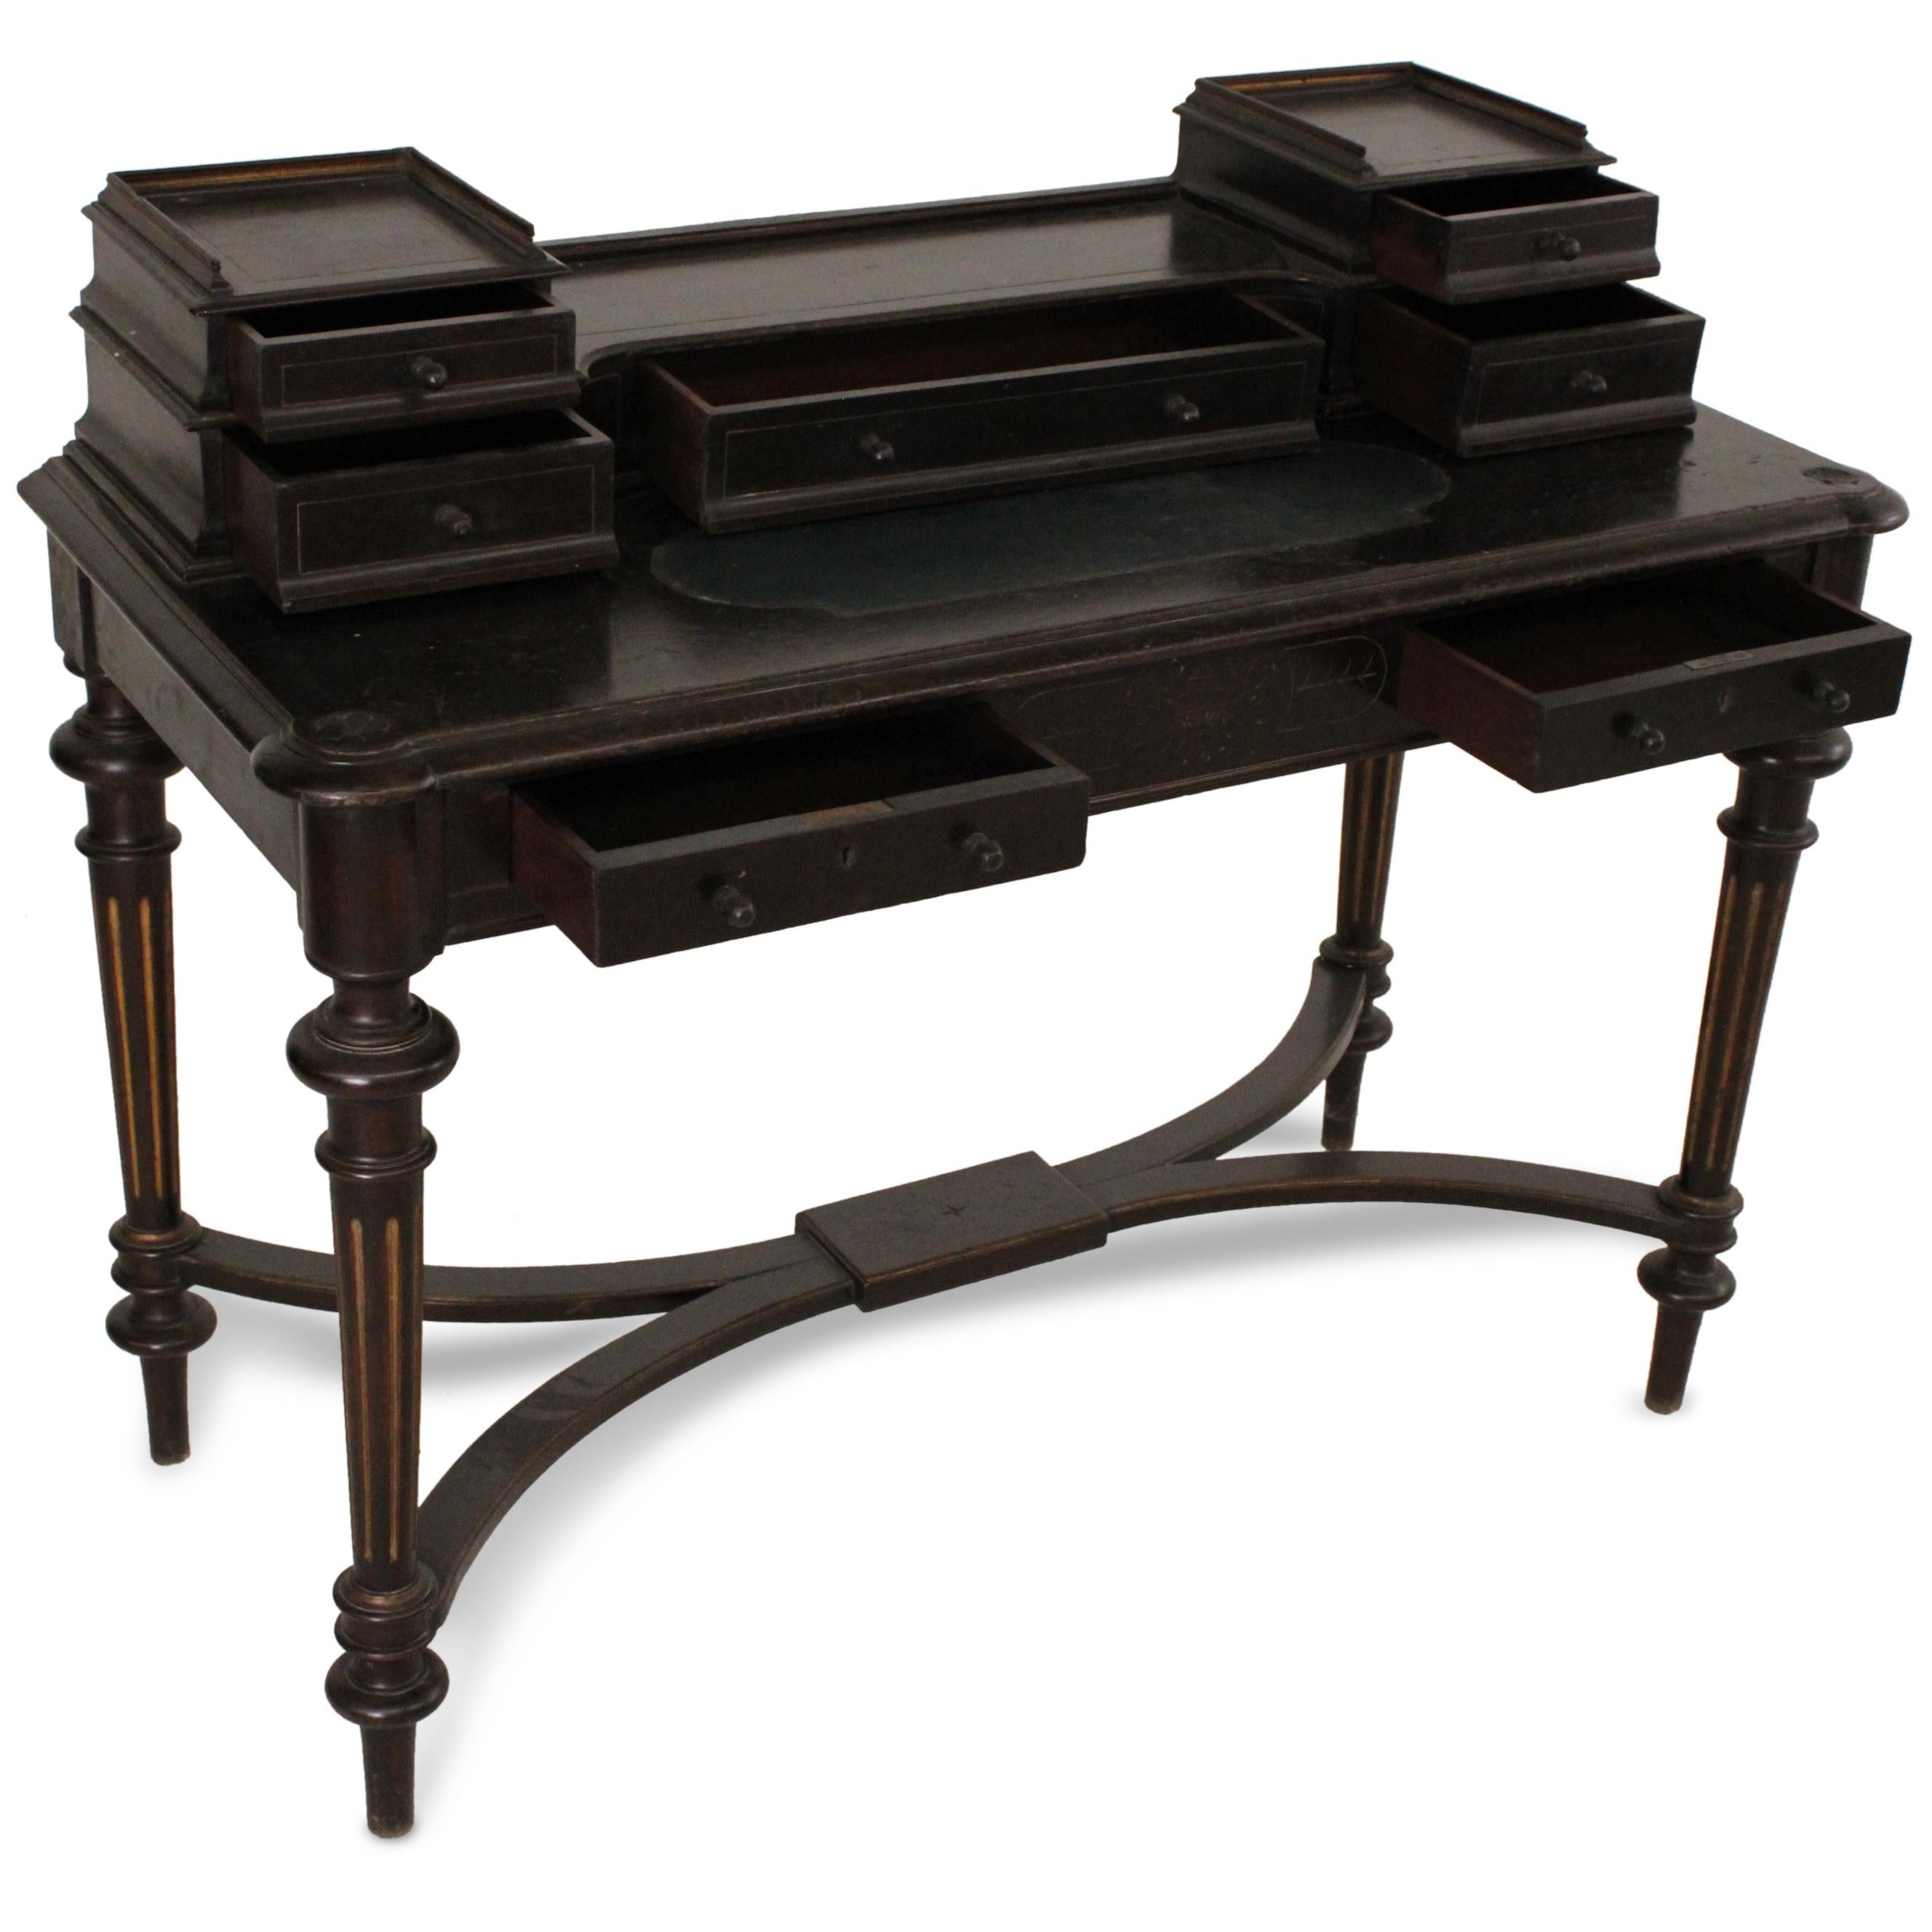 An extraordinary and unique work of master craftmanship, this 19th century desk from an Indian palace has its original set of stretchers, gilding on the fluted feet and a desirable antique patina. Enhancing the desk's functionality and aesthetic